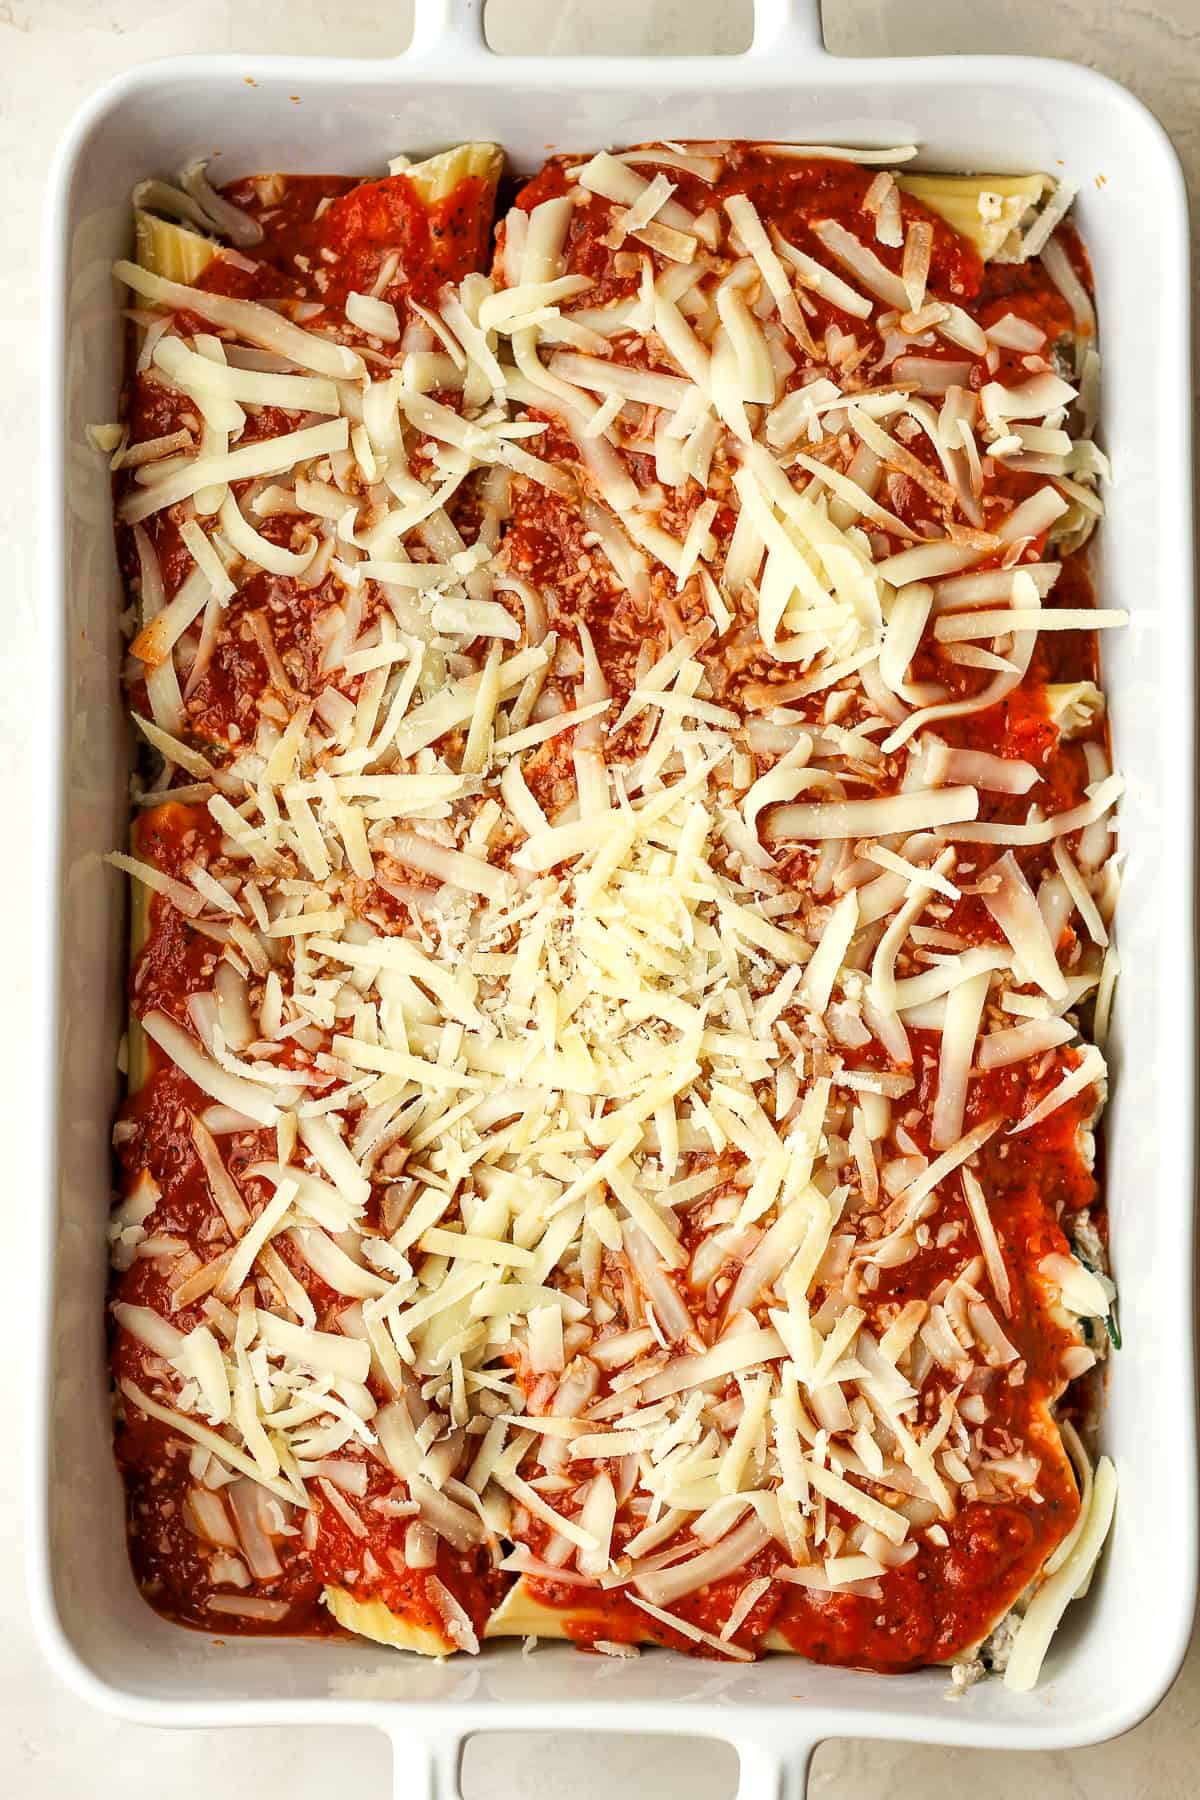 A large casserole dish of beef and cheese manicotti before baking.